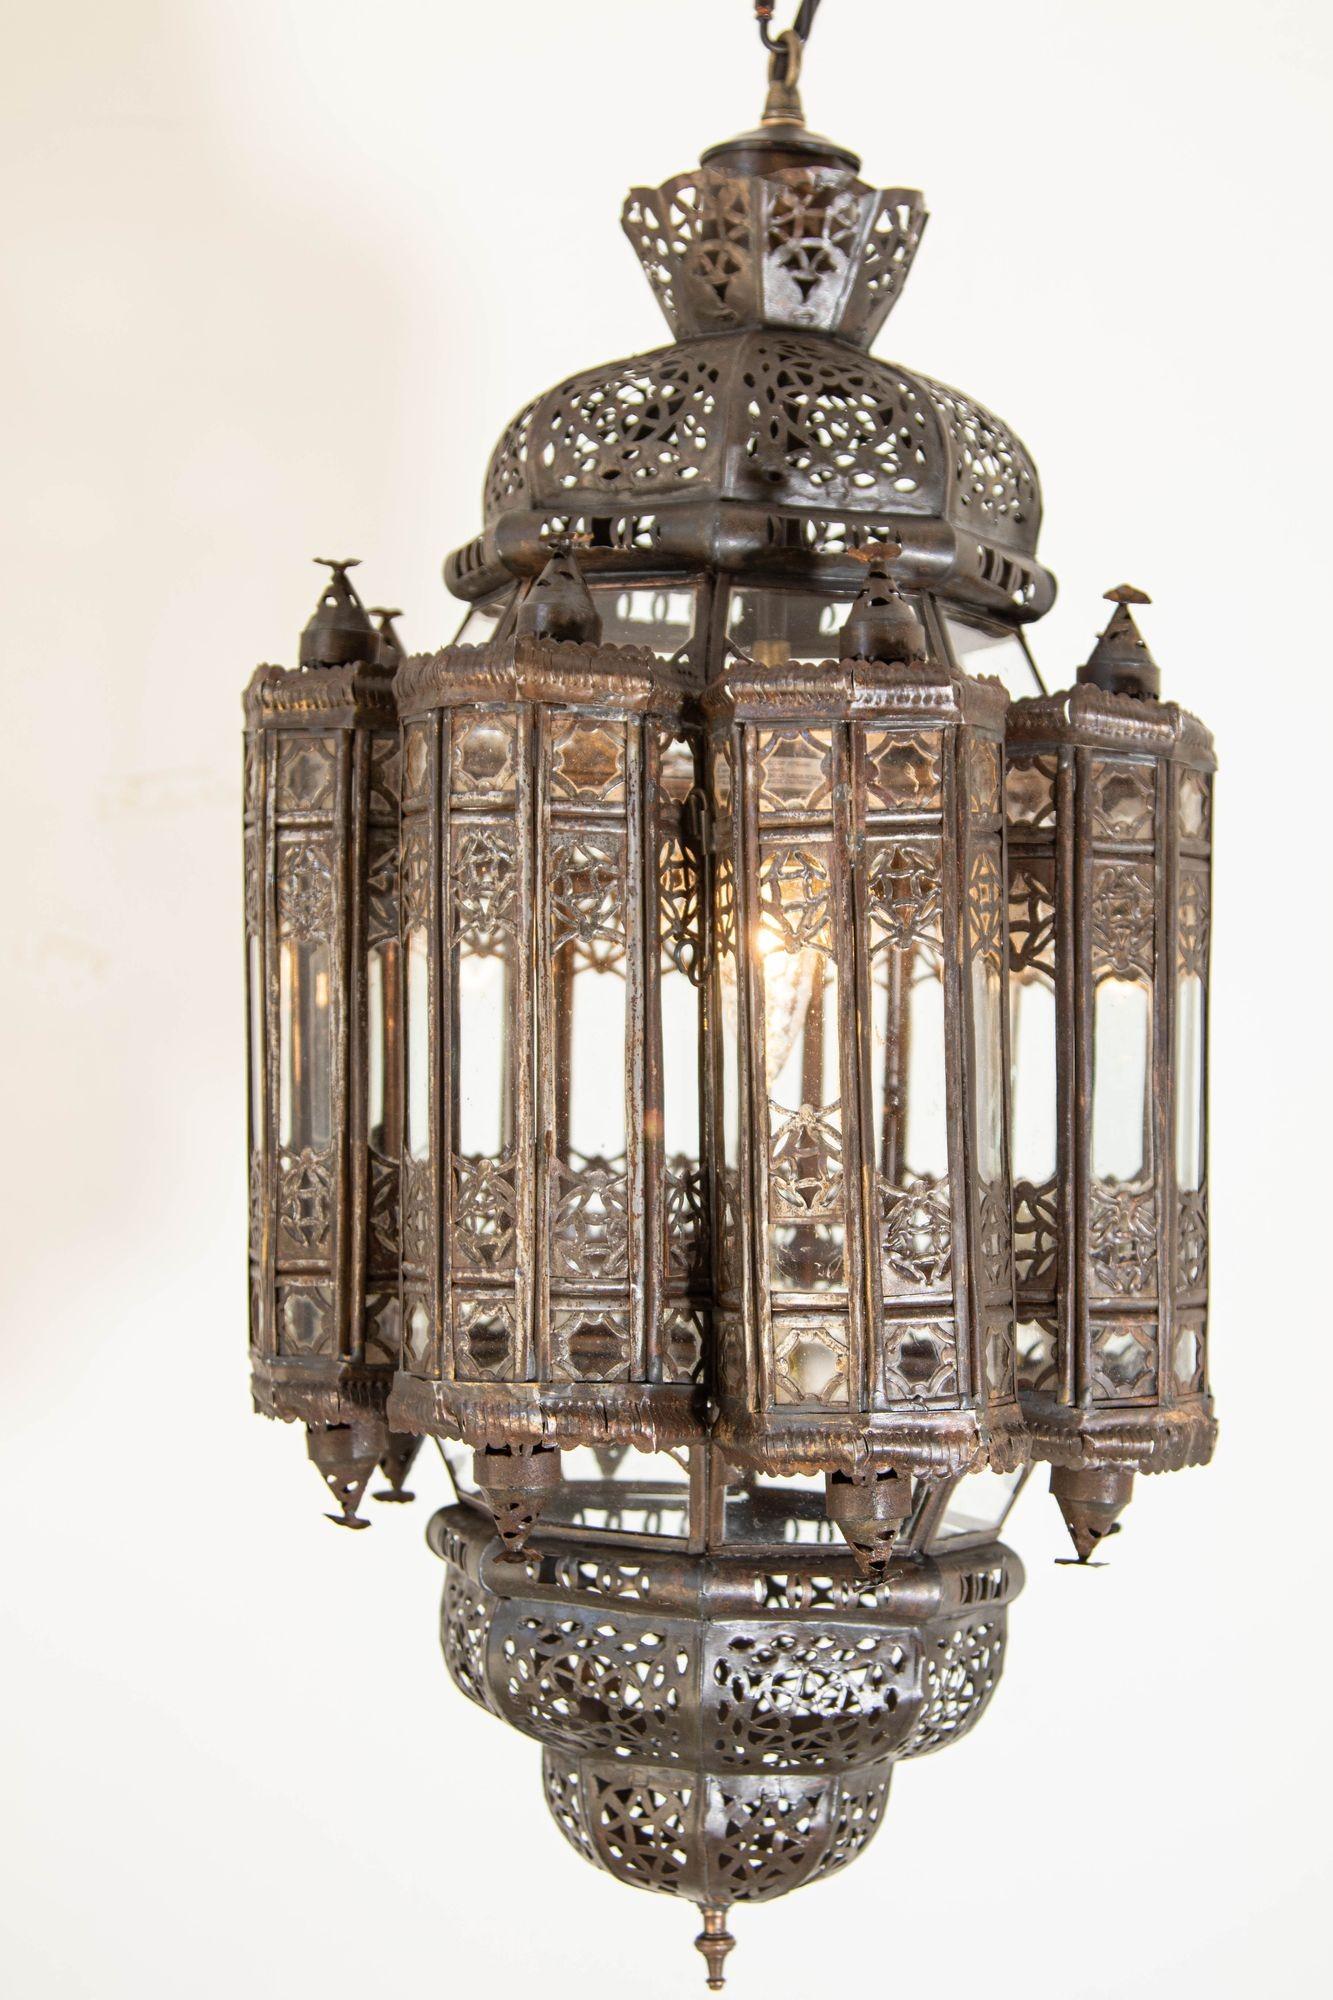 Vintage Moroccan Lantern Mamounia Clear Glass Hand-Crafted Ceiling Light Fixture In Good Condition For Sale In North Hollywood, CA